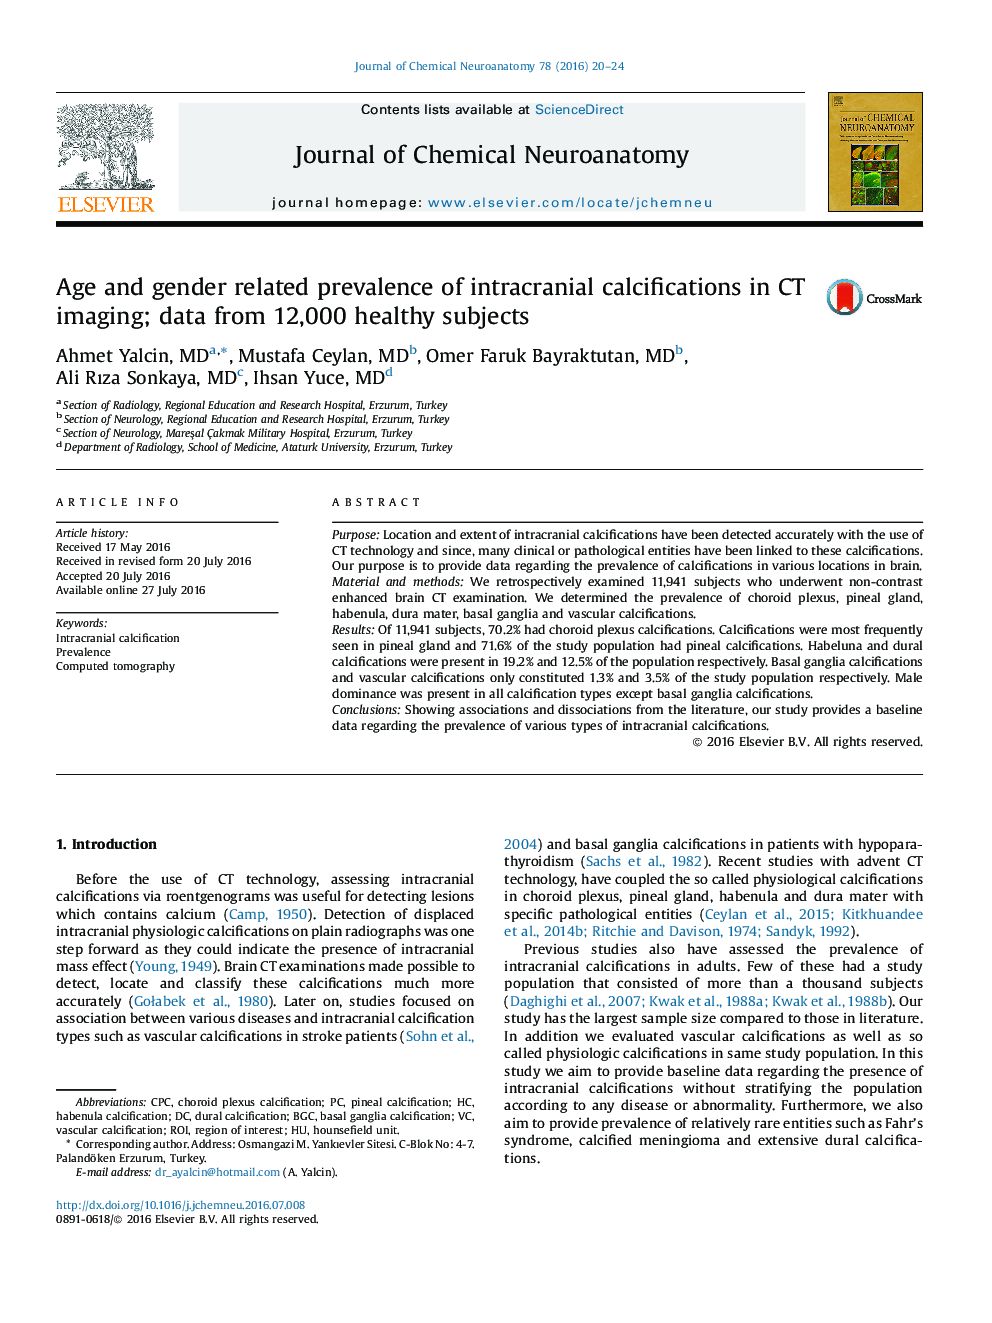 Age and gender related prevalence of intracranial calcifications in CT imaging; data from 12,000 healthy subjects